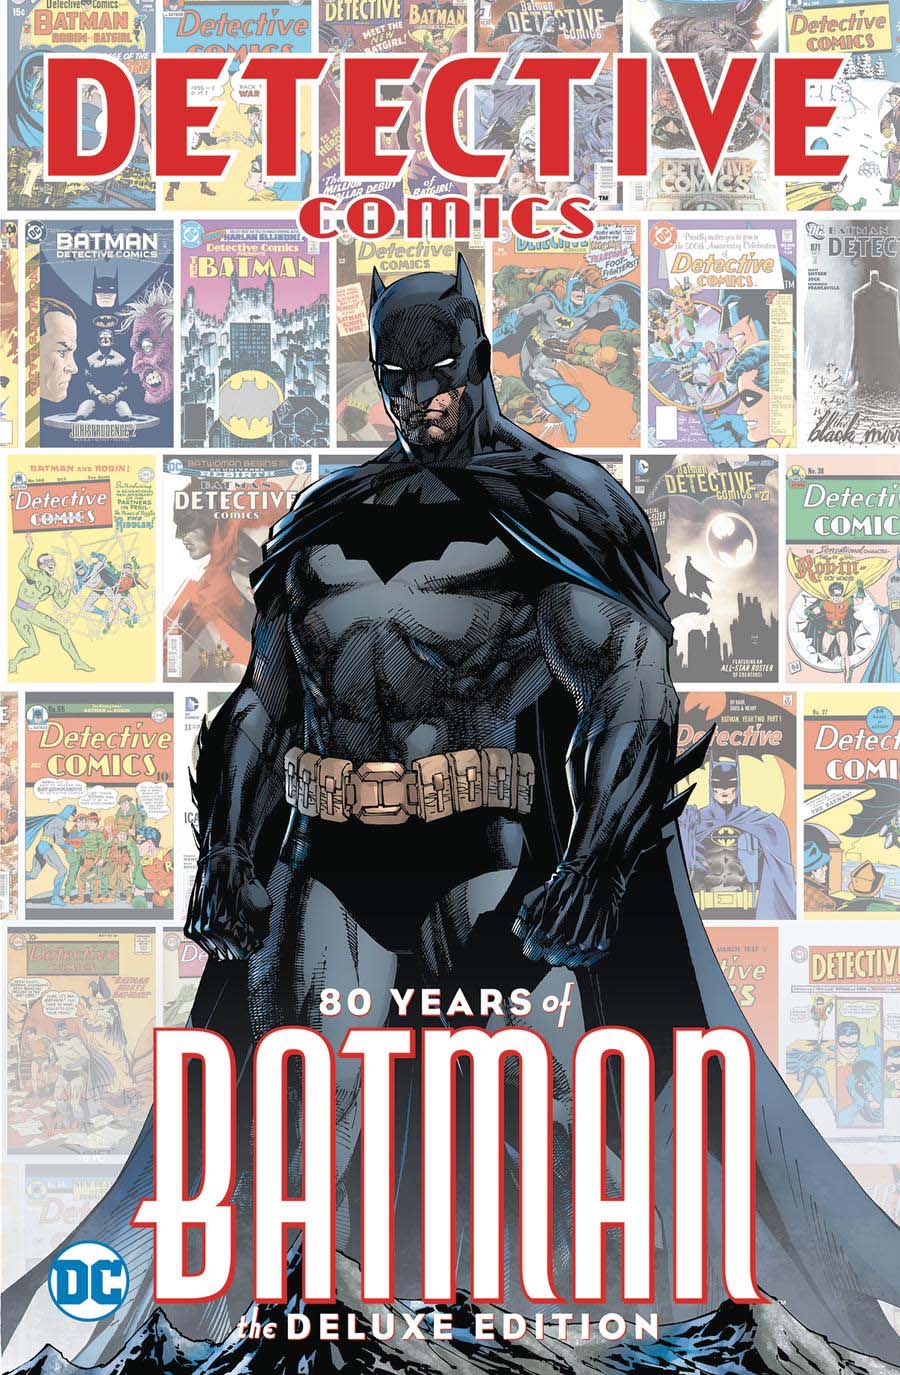 Detective Comics: 80 Years of Batman: The Deluxe Edition, cover, art by Jim Lee & Scott Williams